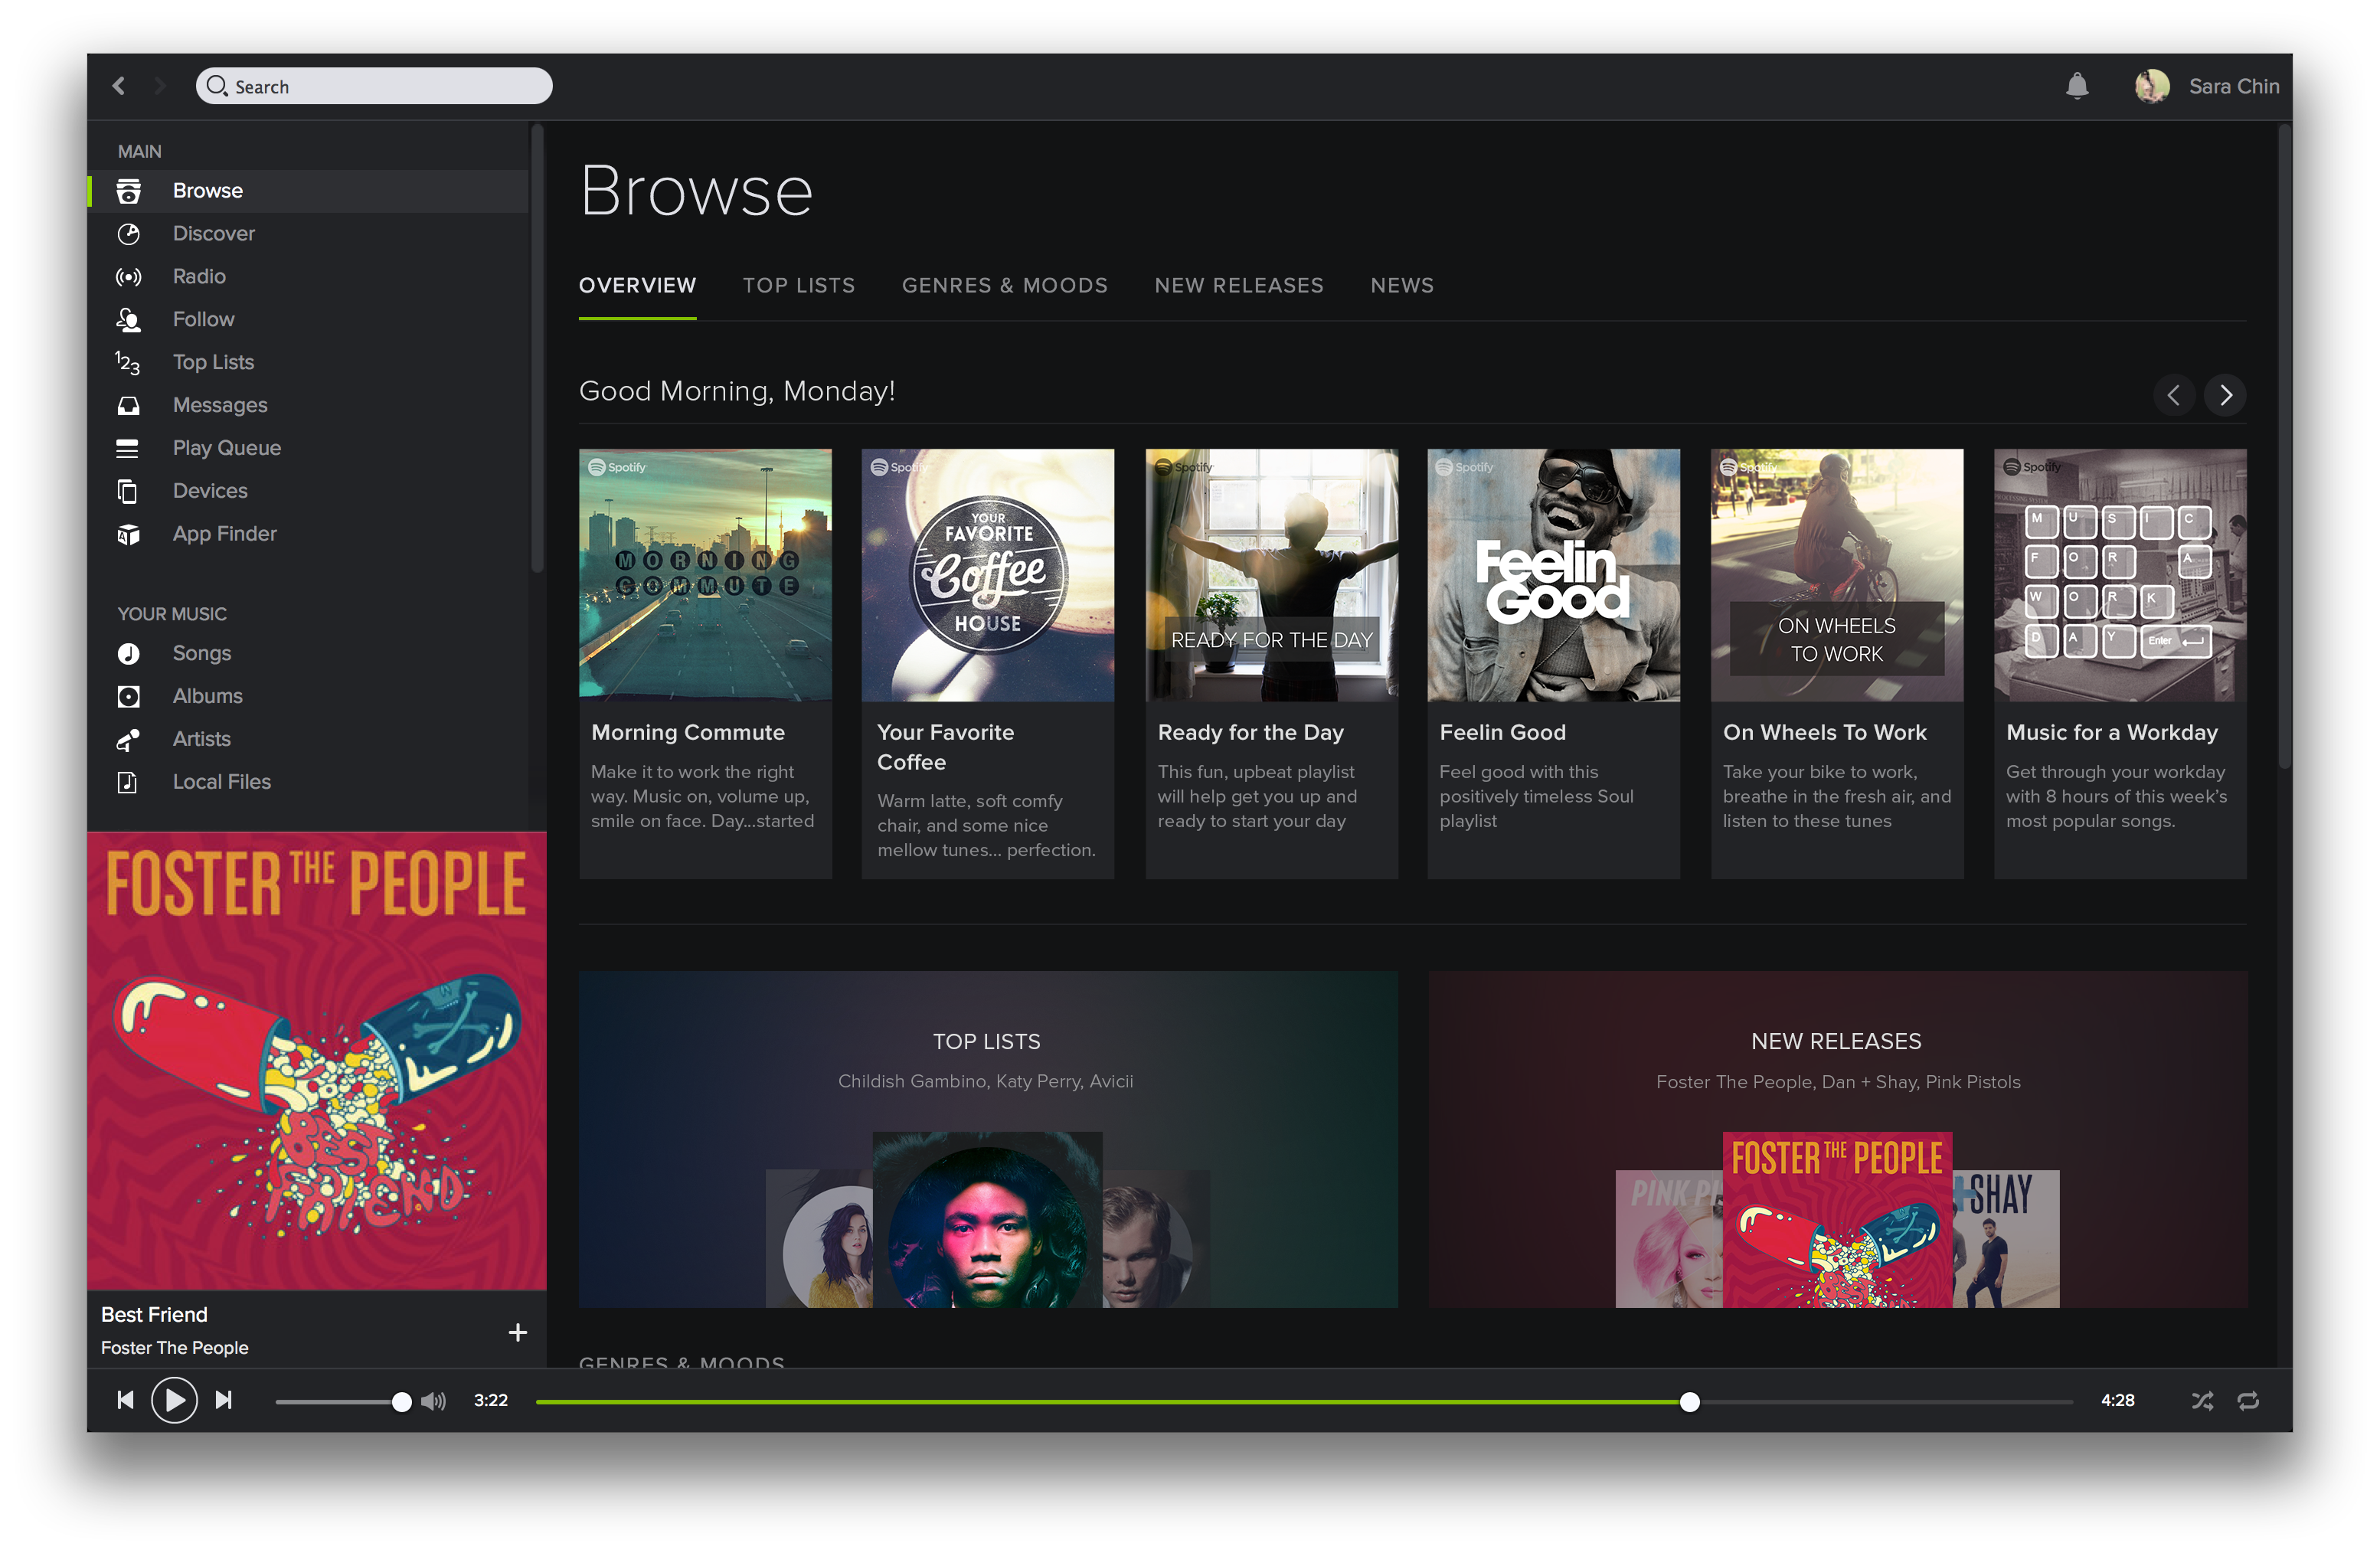 Spotify Finally Isn't Ugly Anymore! - Business Insider - Spotify Interface